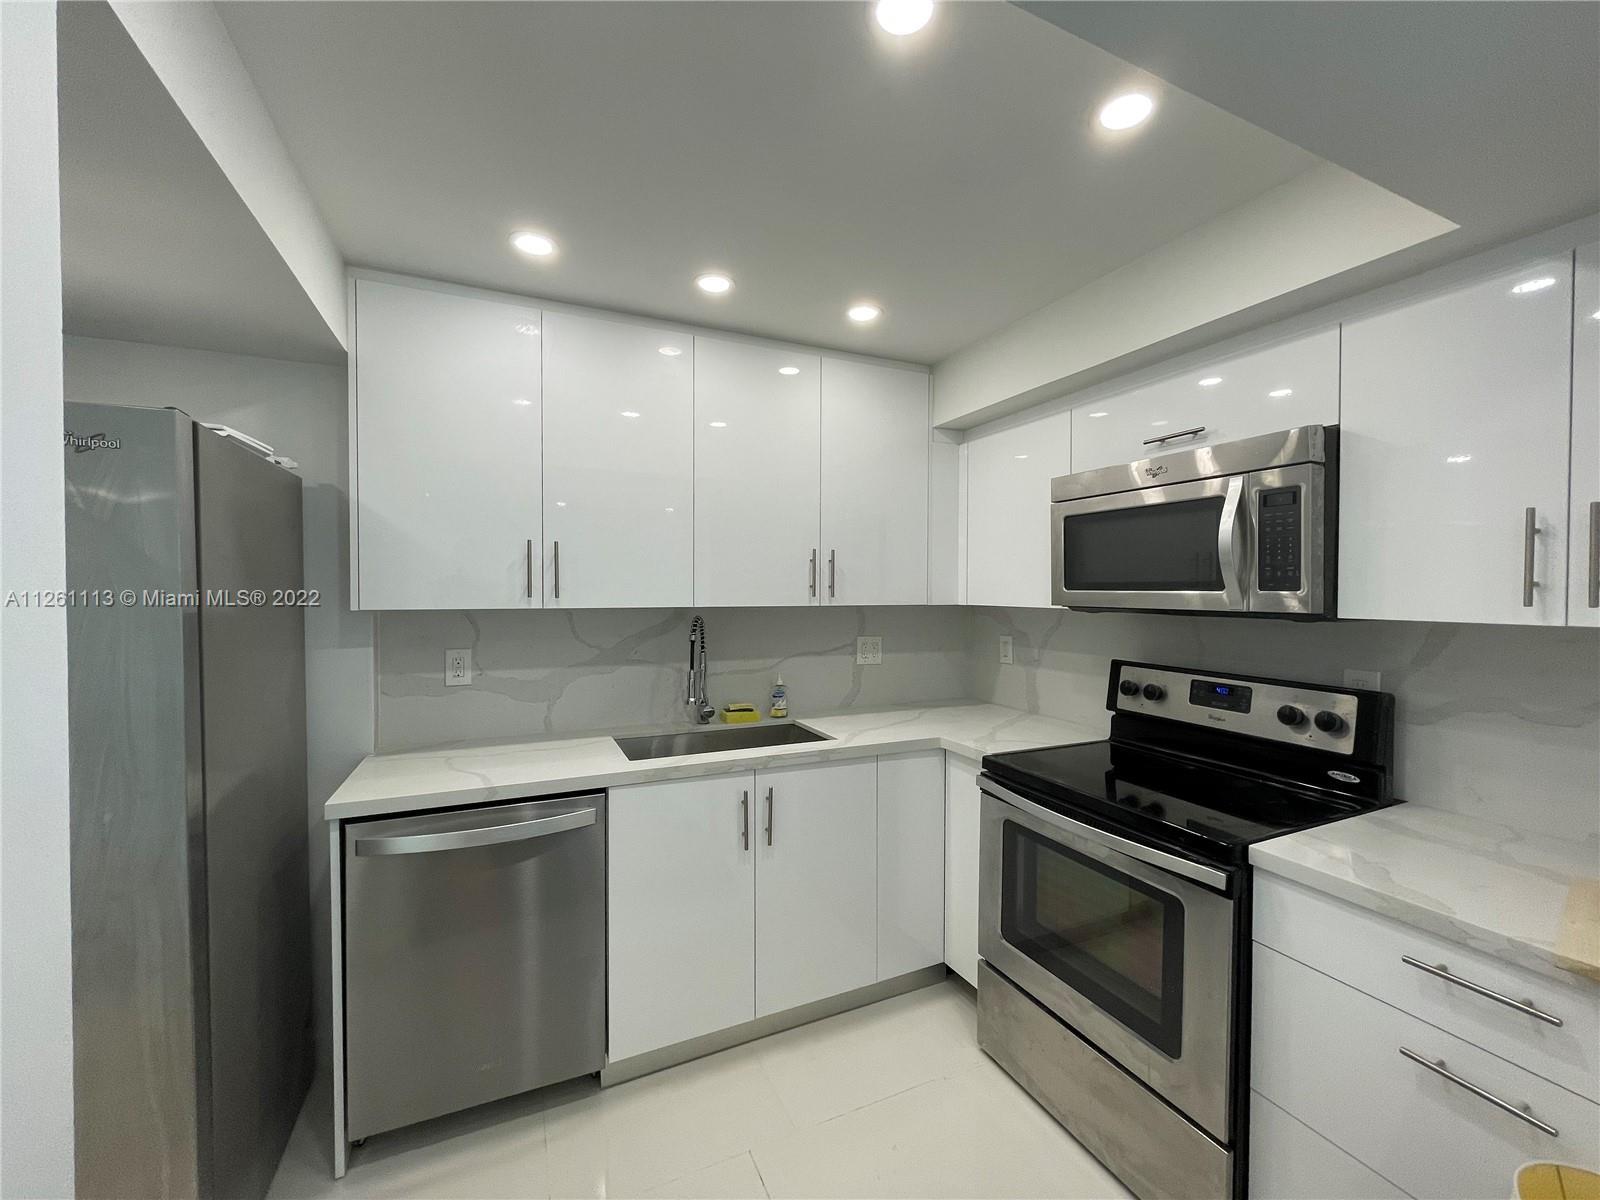 LOCATION! COMPLETLY RENOVATED 2 BEDROOM/2 BATH UNIT IN WINSTON TOWERS COMPLEX OF SUNNY ISLES. CUSTOM